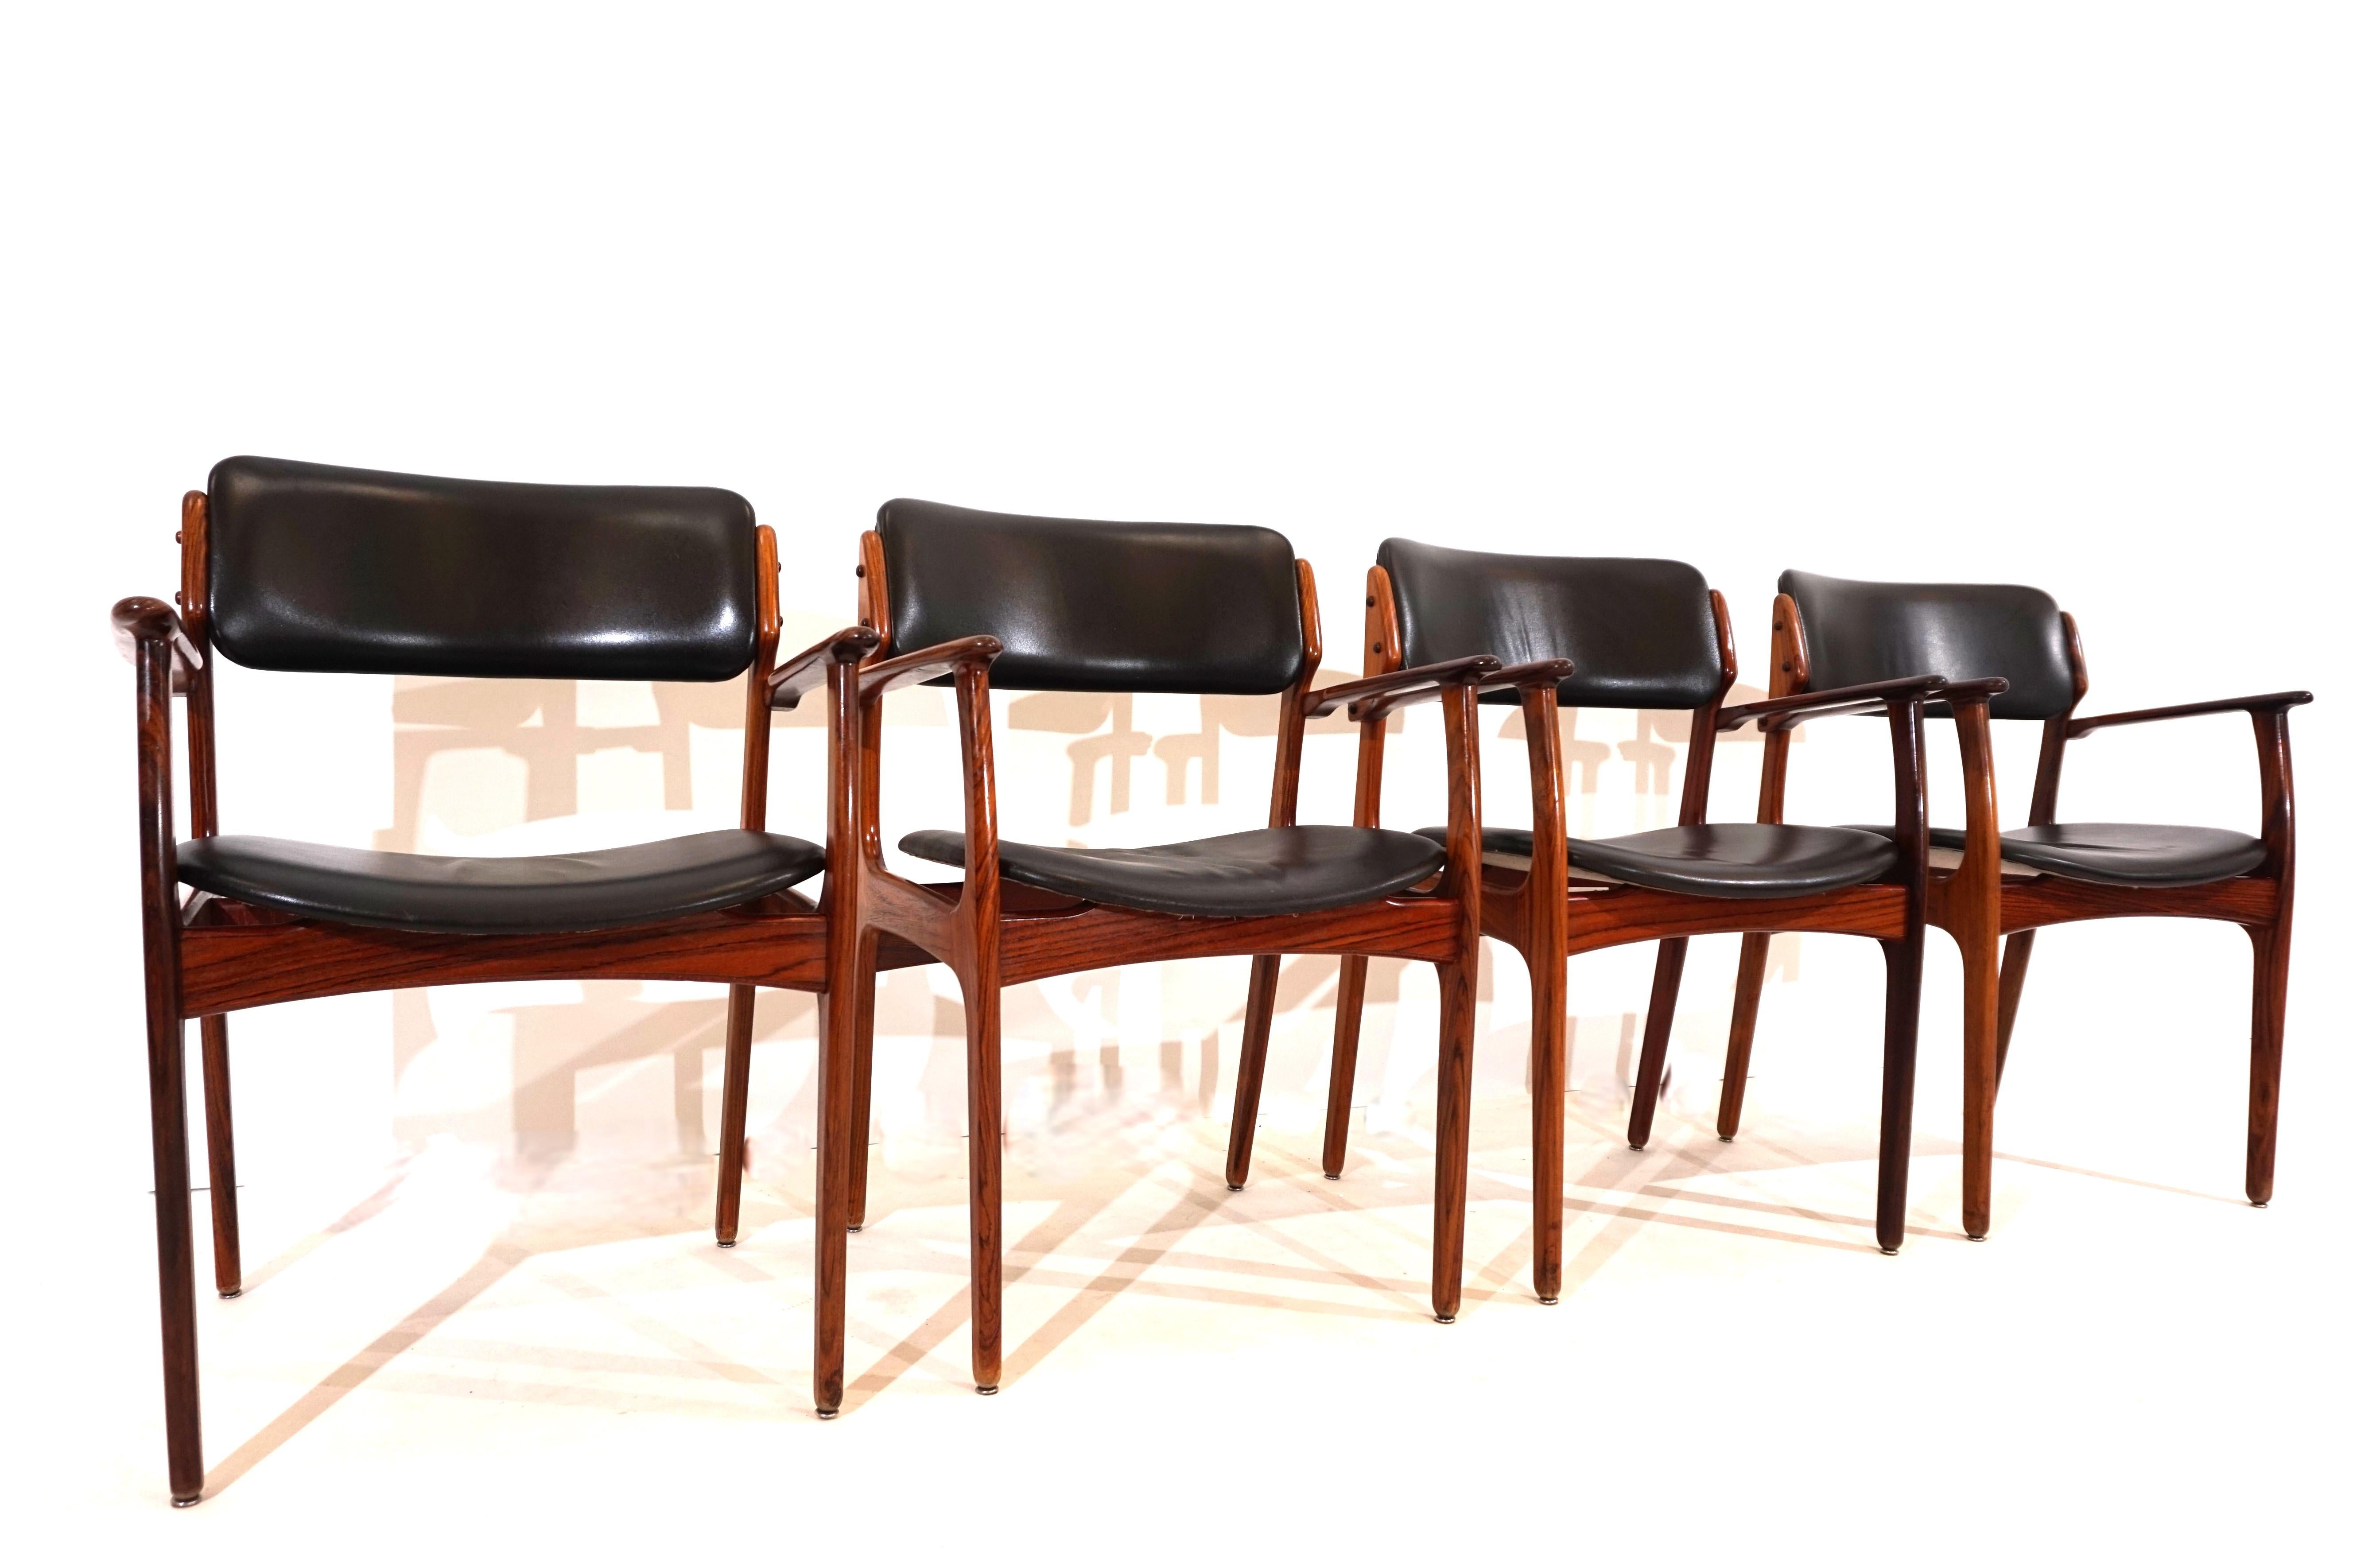 This set of four OD 50 dining room chairs is in great original condition. The rosewood frames with a very attractive grain show minimal signs of wear. The black Skai leather cover of the armchairs only shows slight signs of wear on one of the